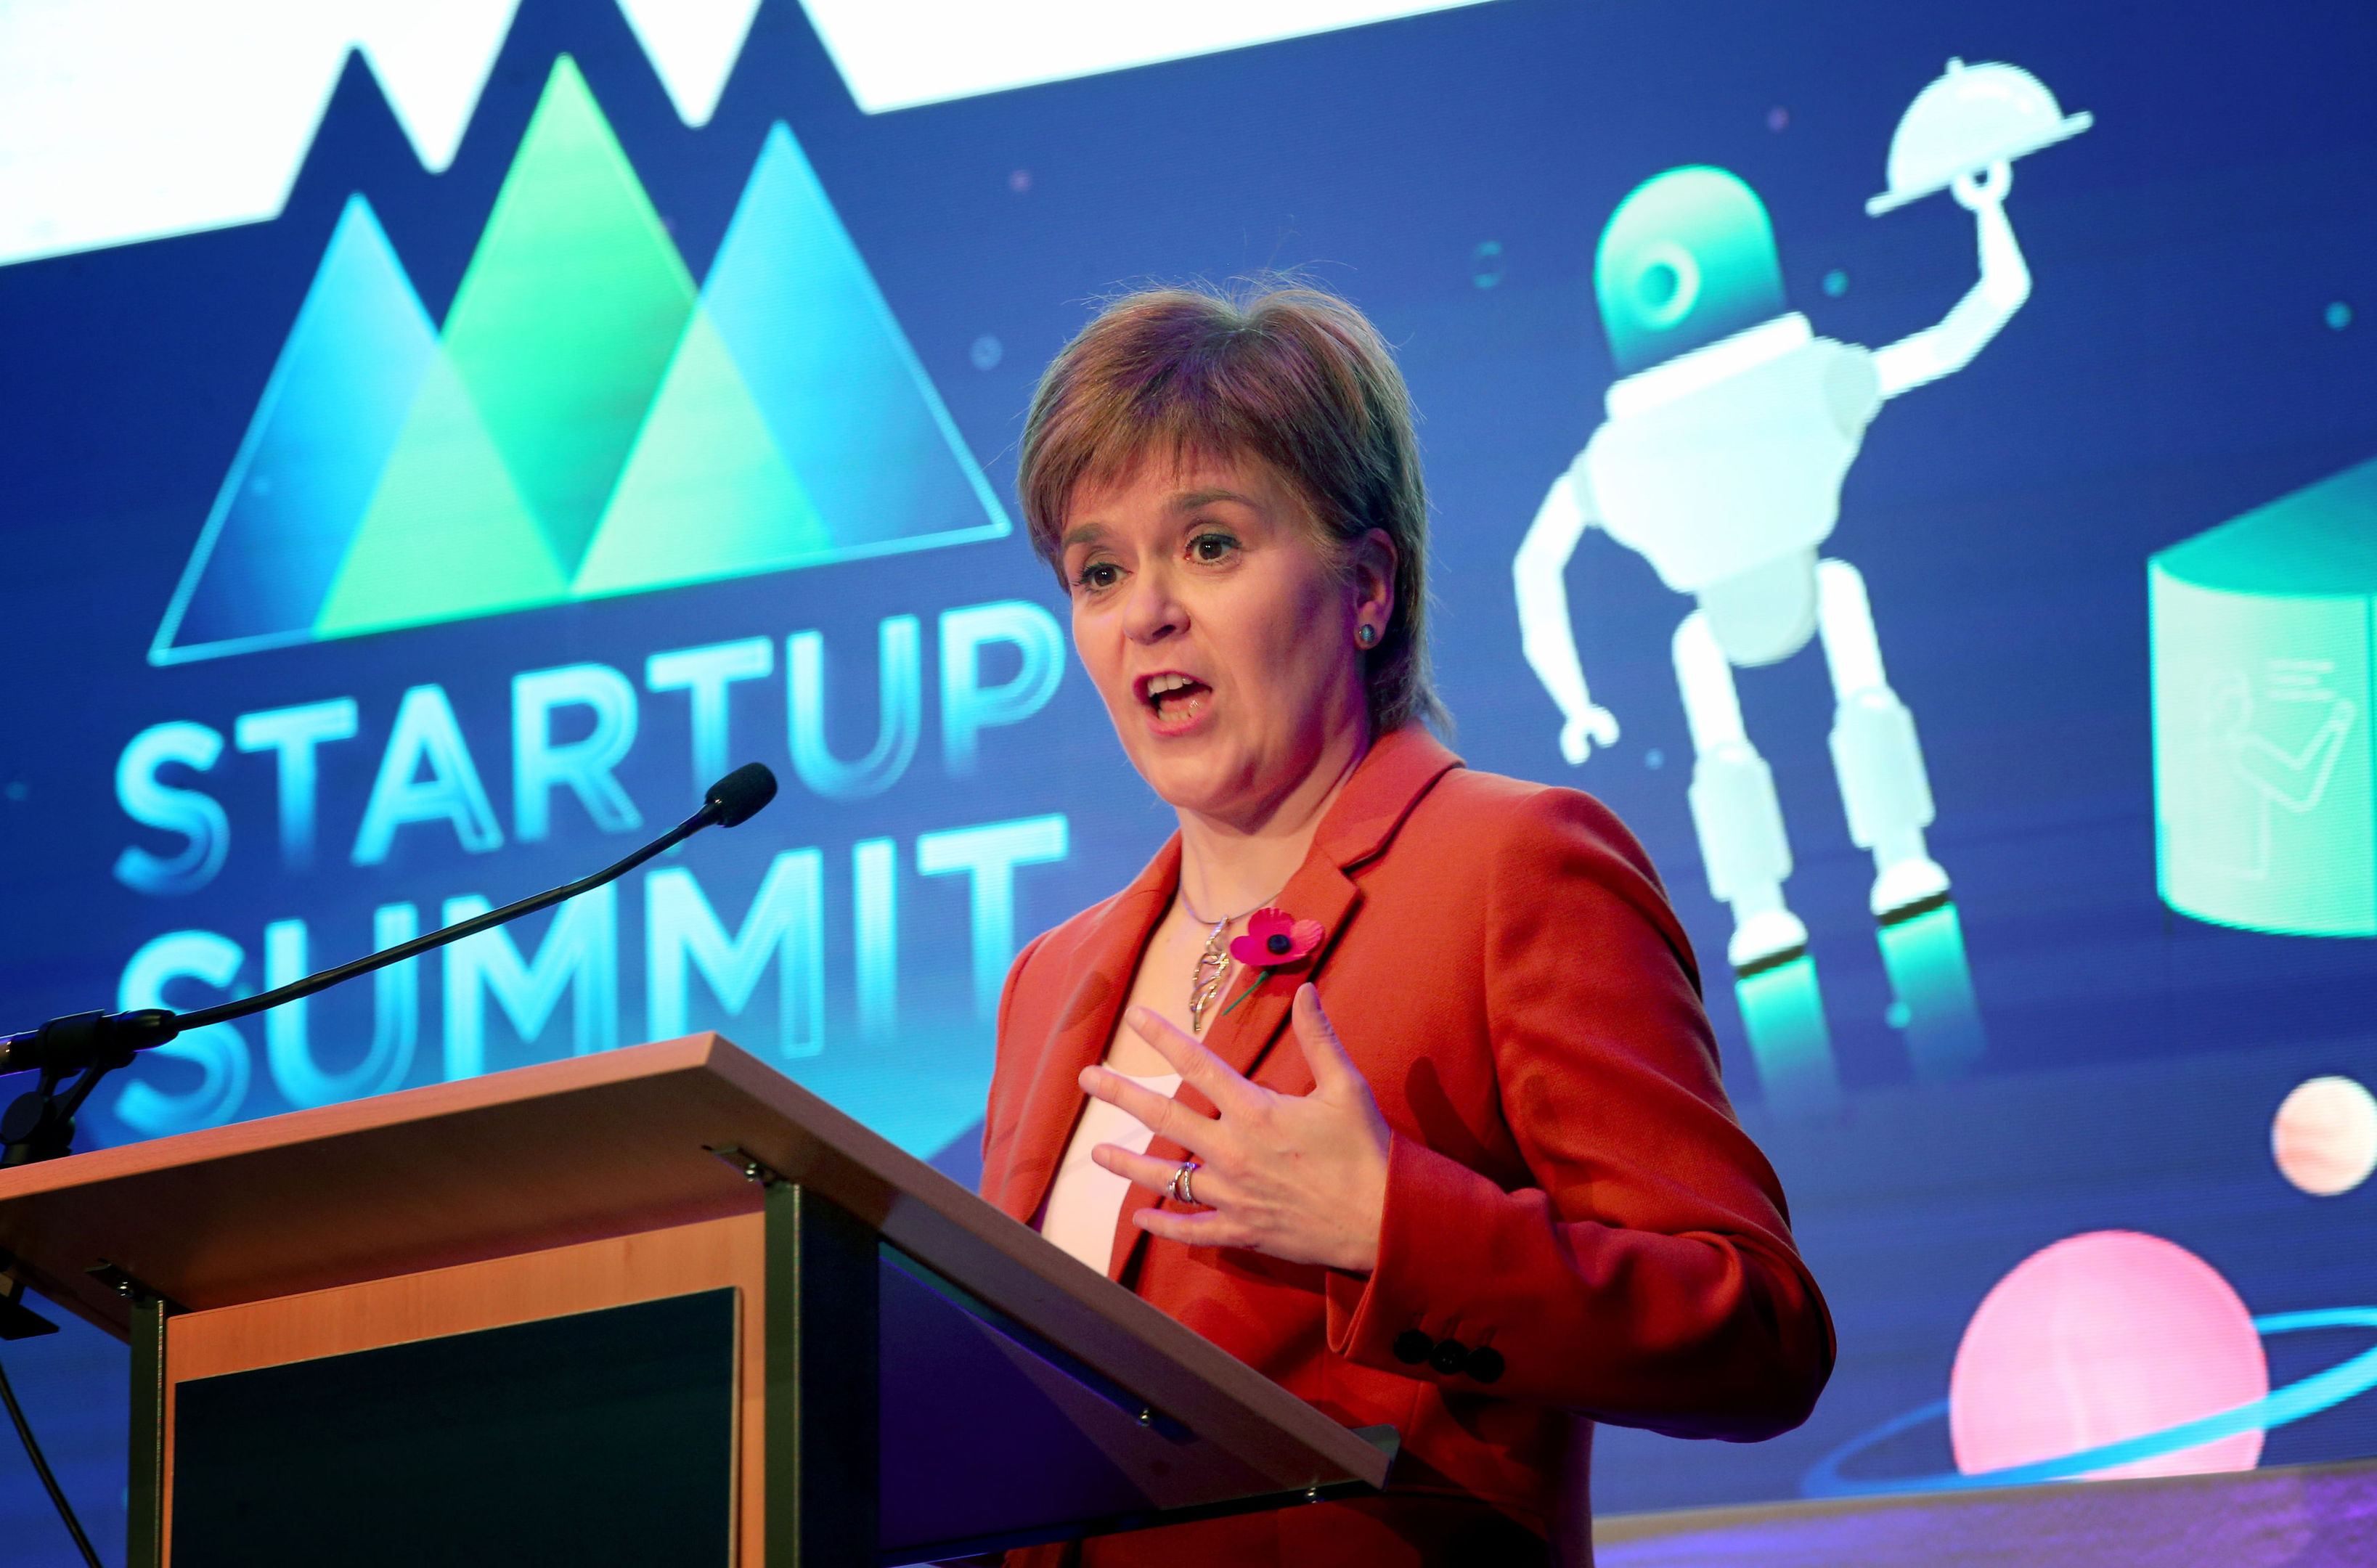 First Minister Nicola Sturgeon delivers a speech to the Start-Up Summit, an annual event focused on helping new businesses grow, at the Assembly Rooms in Edinburgh. (Jane Barlow/PA Wire)